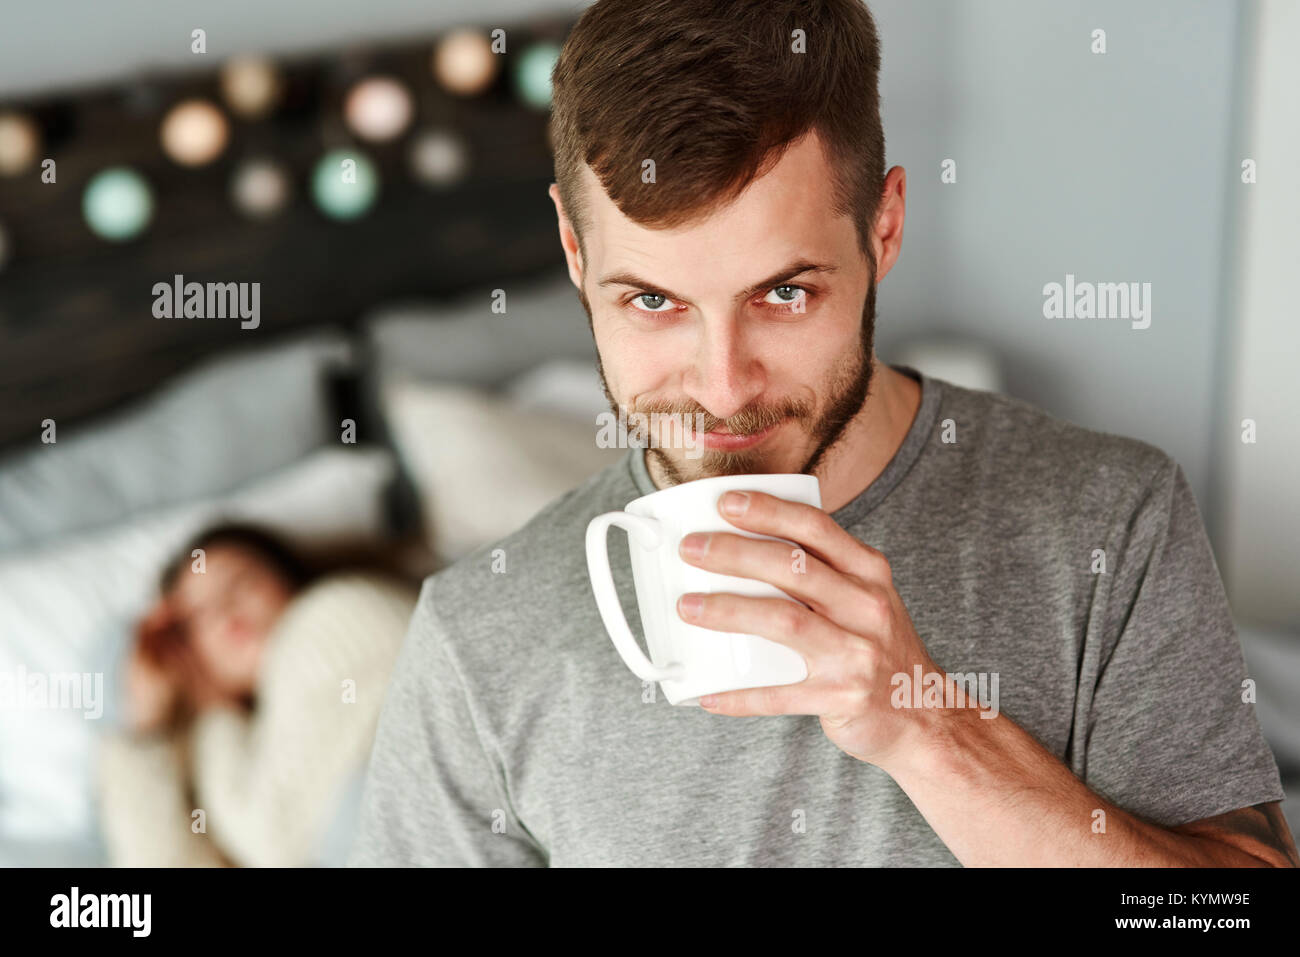 Front view of man drinking coffee in bedroom Stock Photo